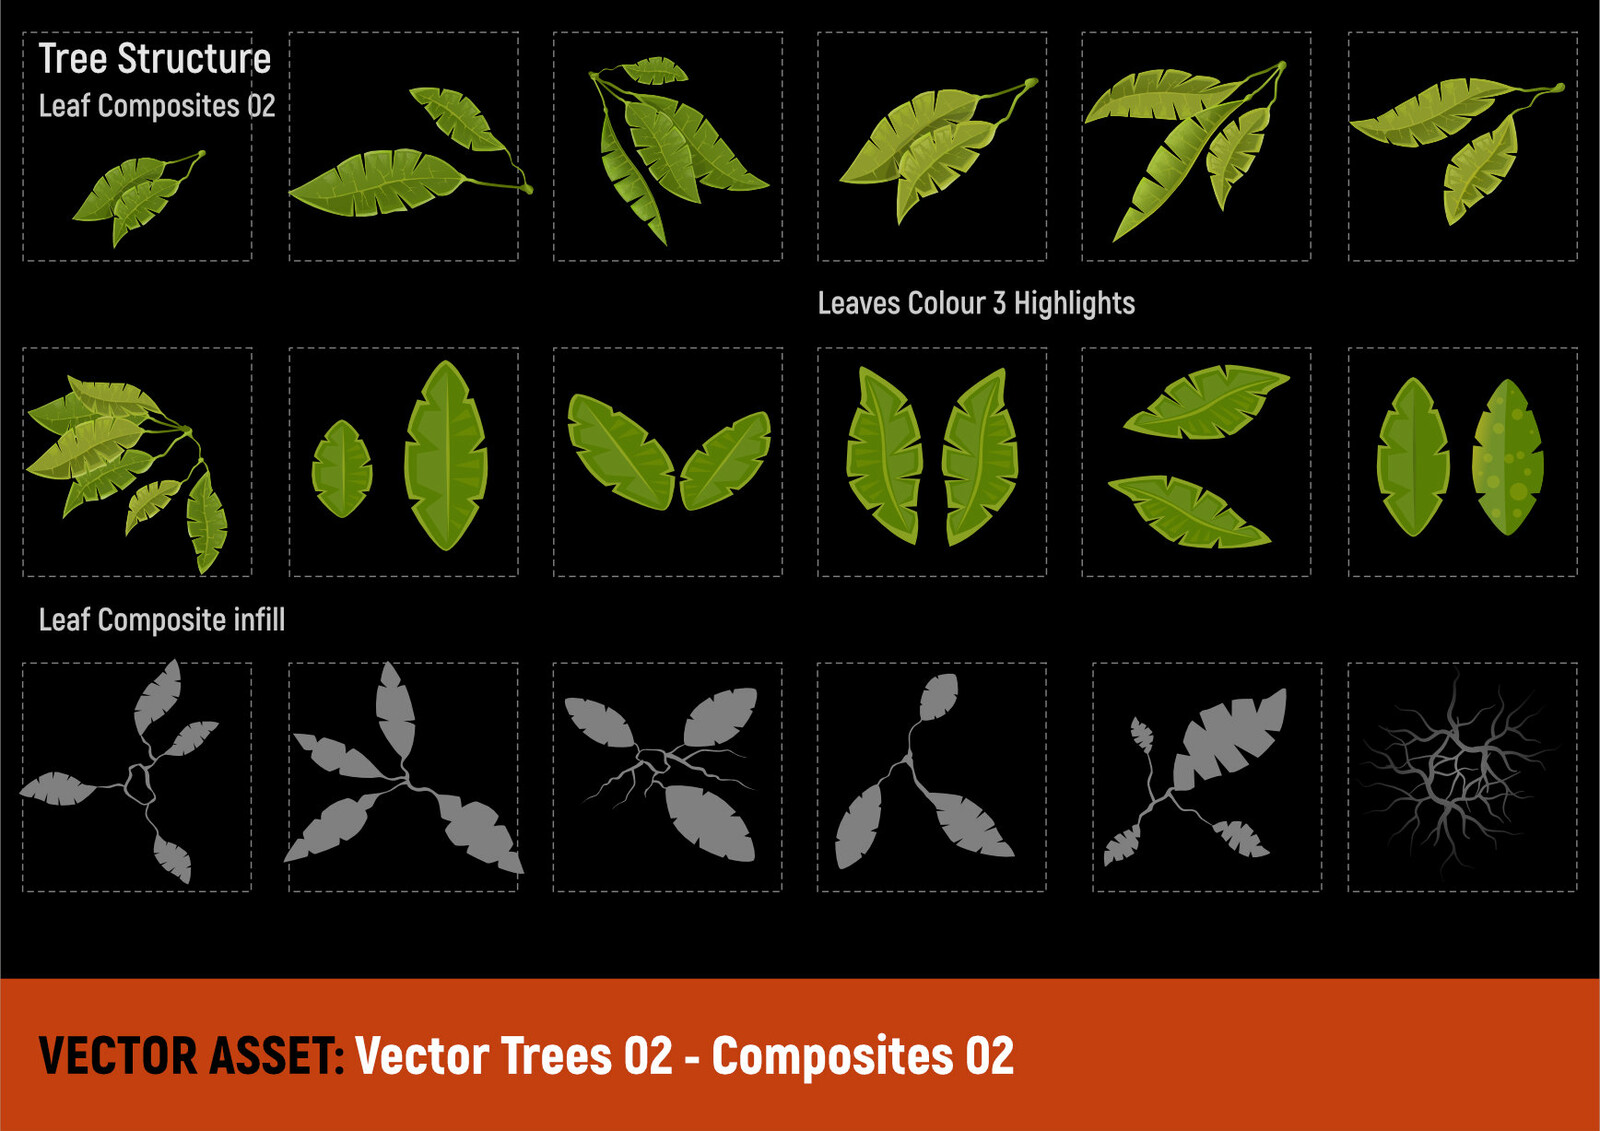 Leaf Compositions and shapes